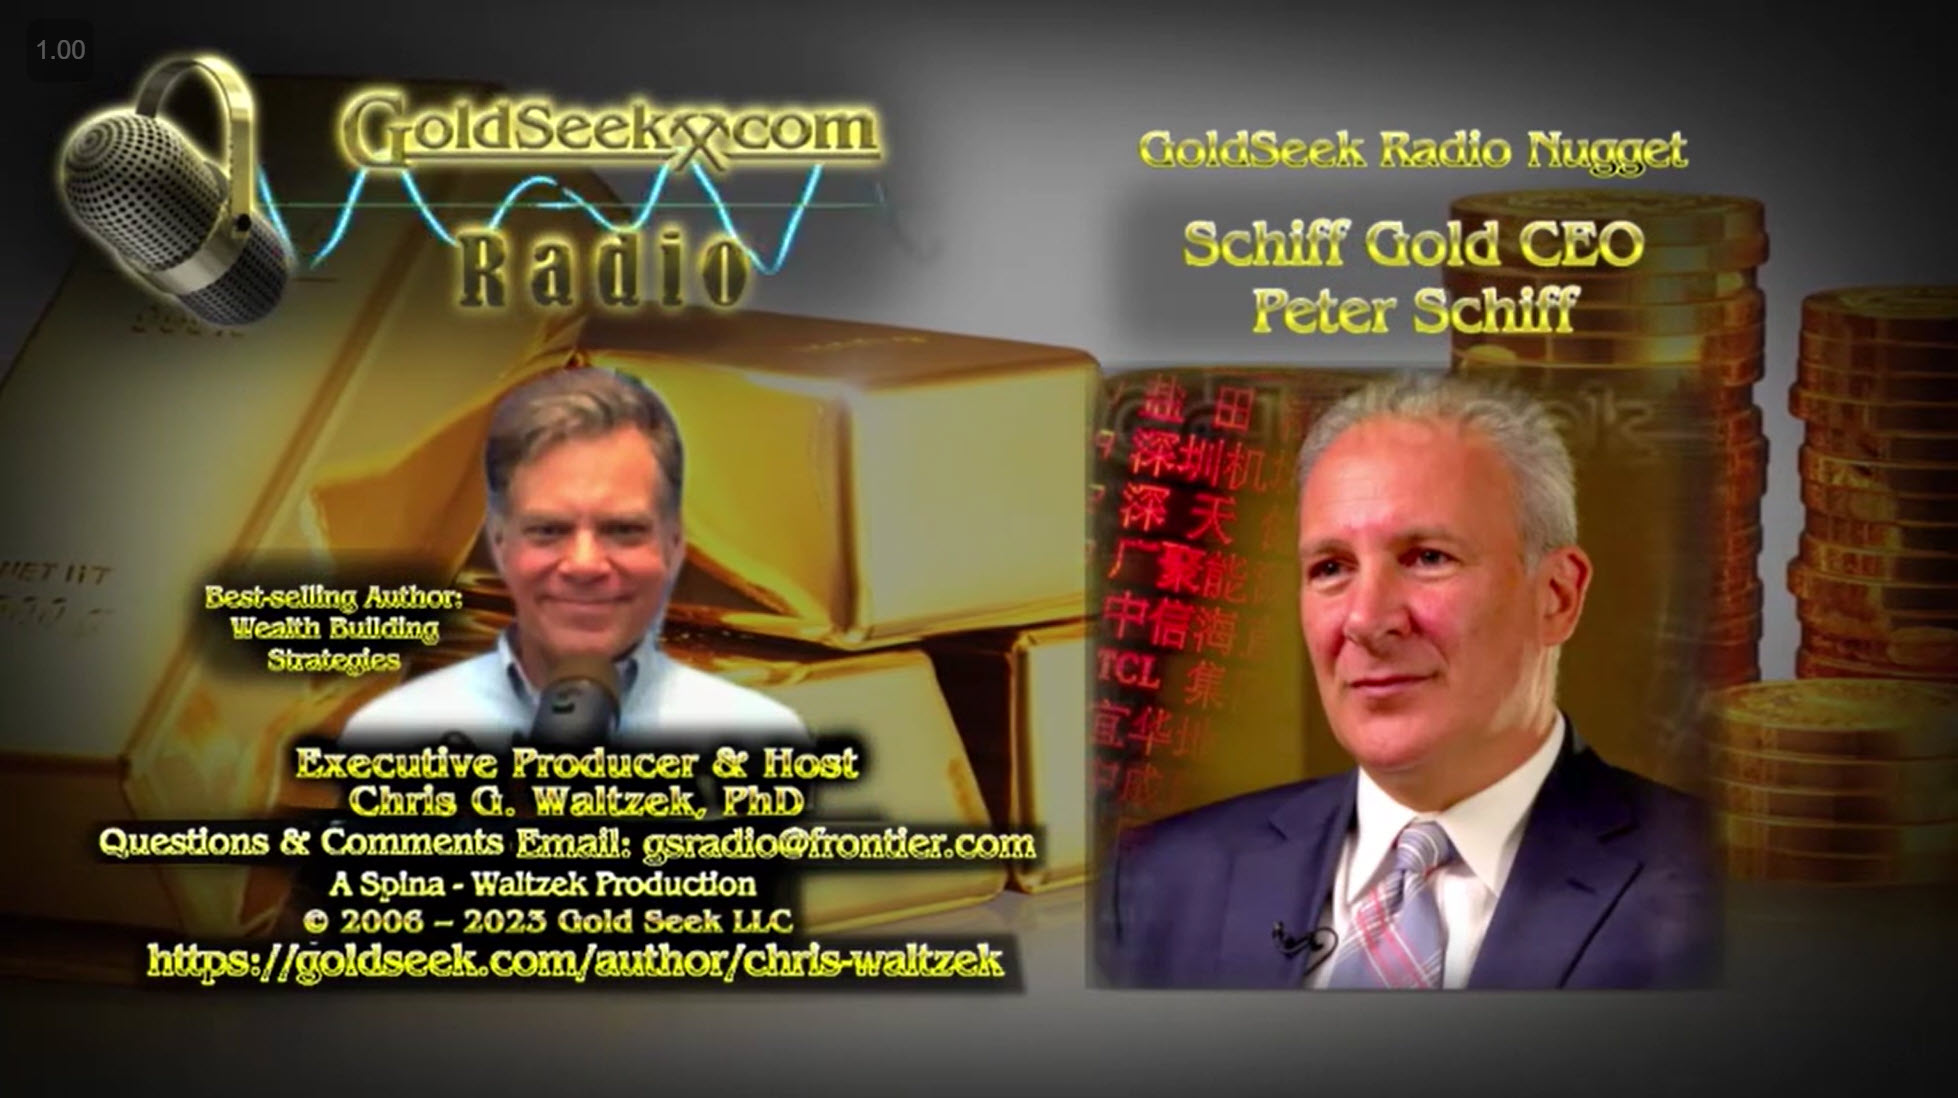 GoldSeek Radio Nugget Peter Schiff 2024 Could Be One of the Biggest